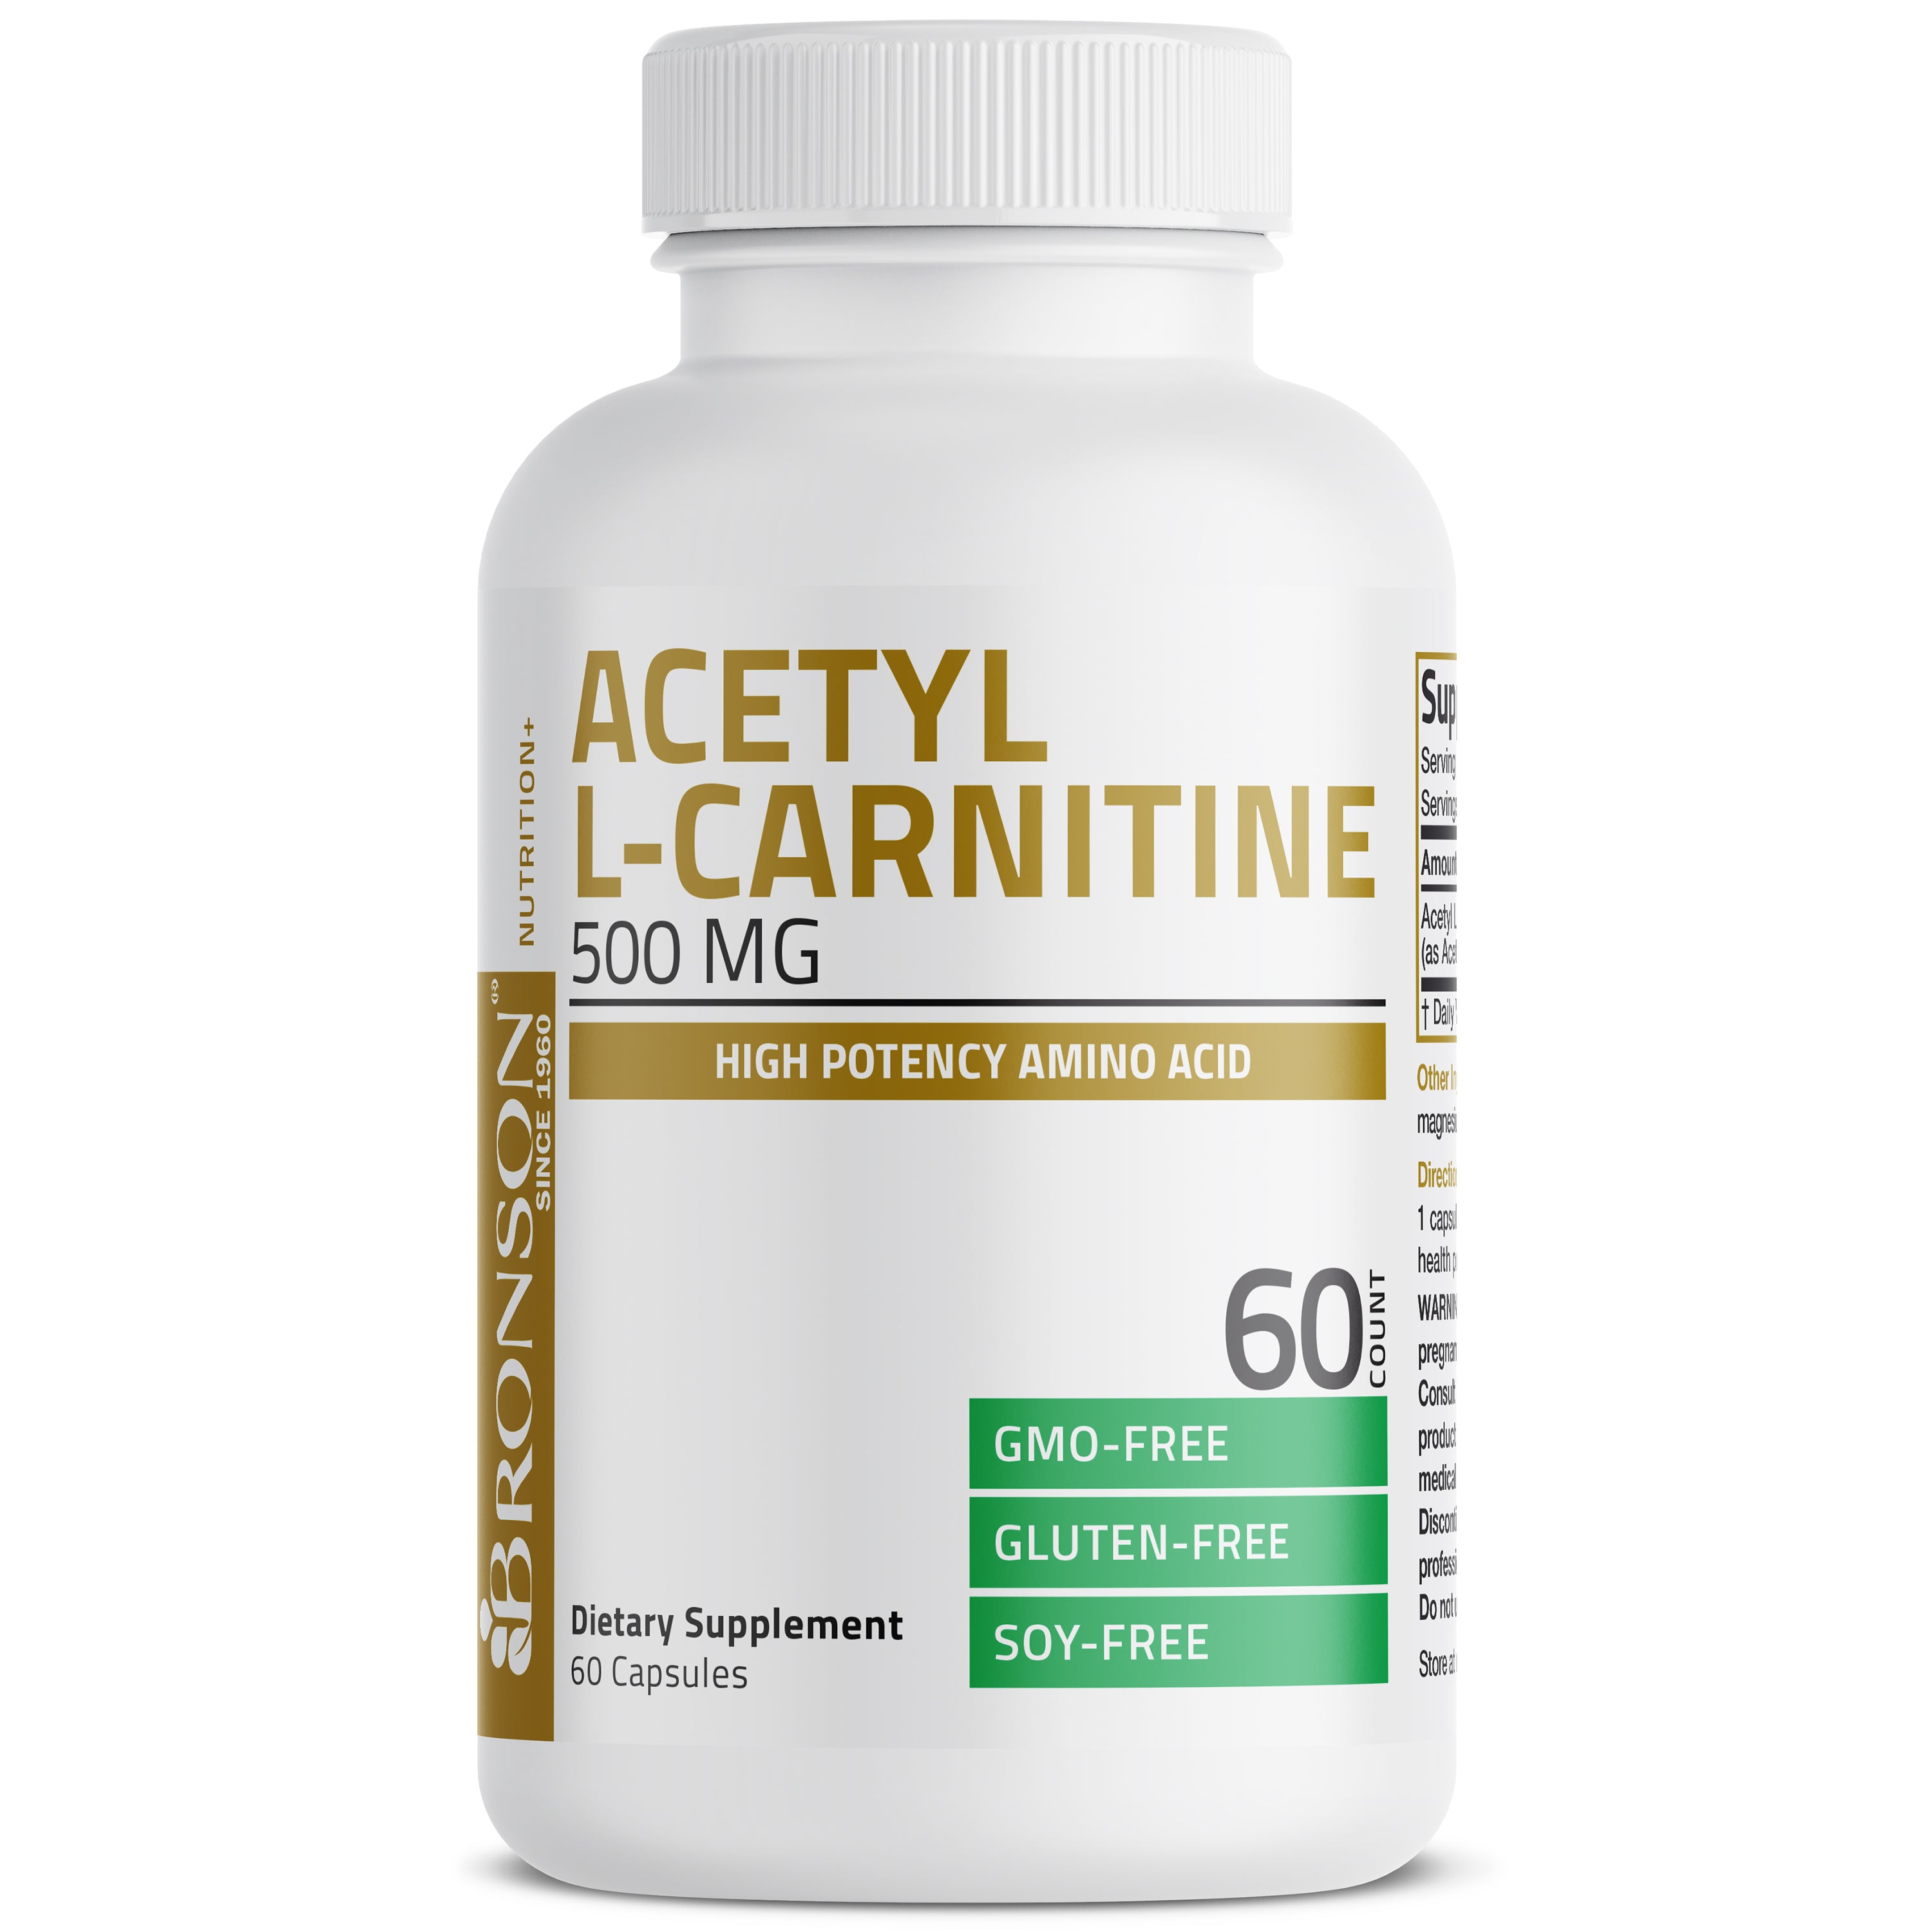 Acetyl L-Carnitine - 500 MG view 1 of 4